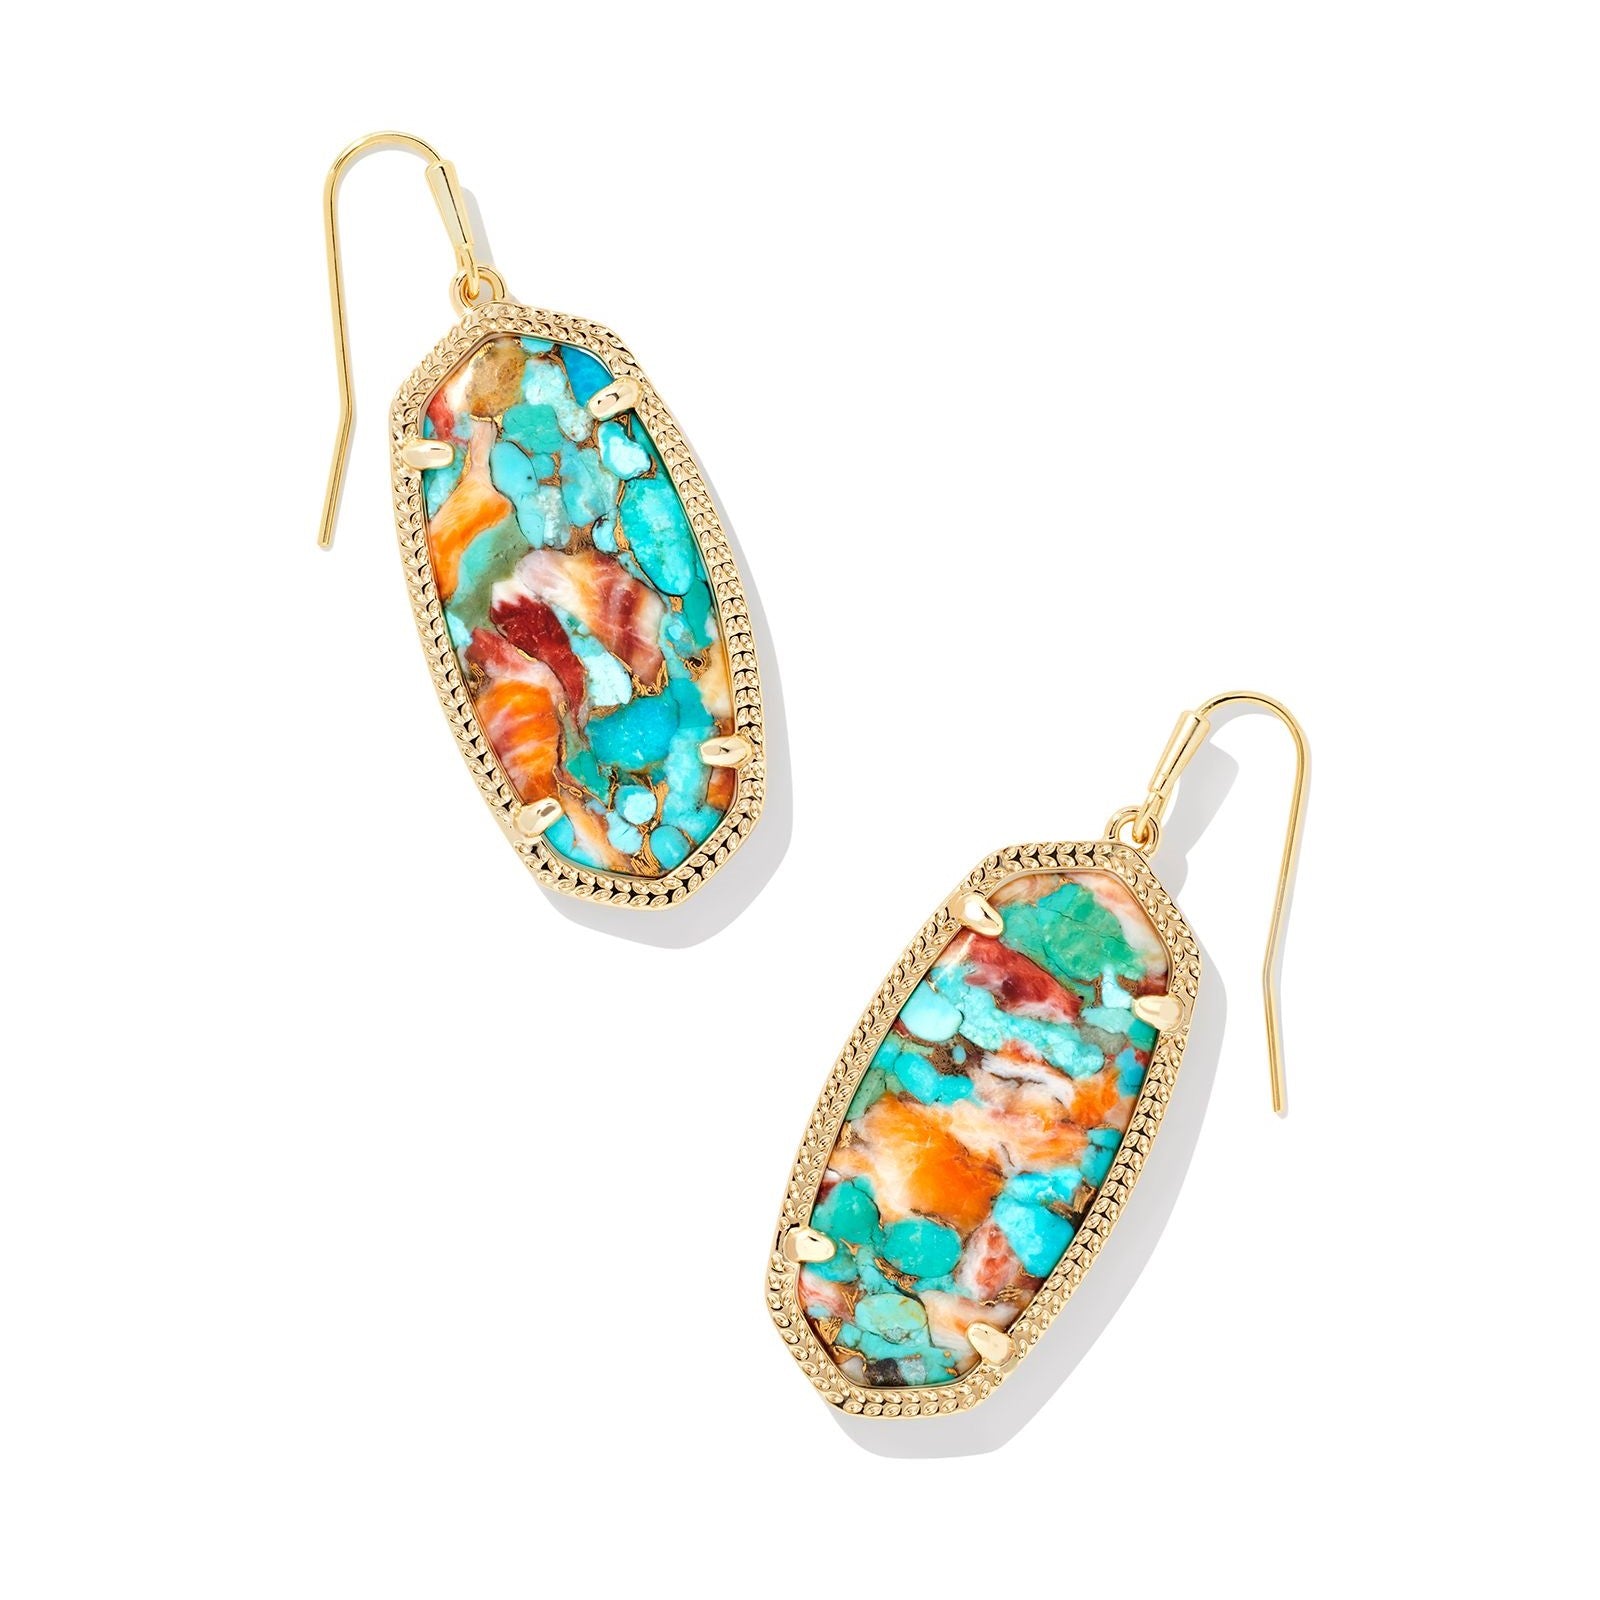 Kendra Scott | Elle Gold Drop Earrings in Bronze Veined Turquoise Magnesite Red Oyster - Giddy Up Glamour Boutique